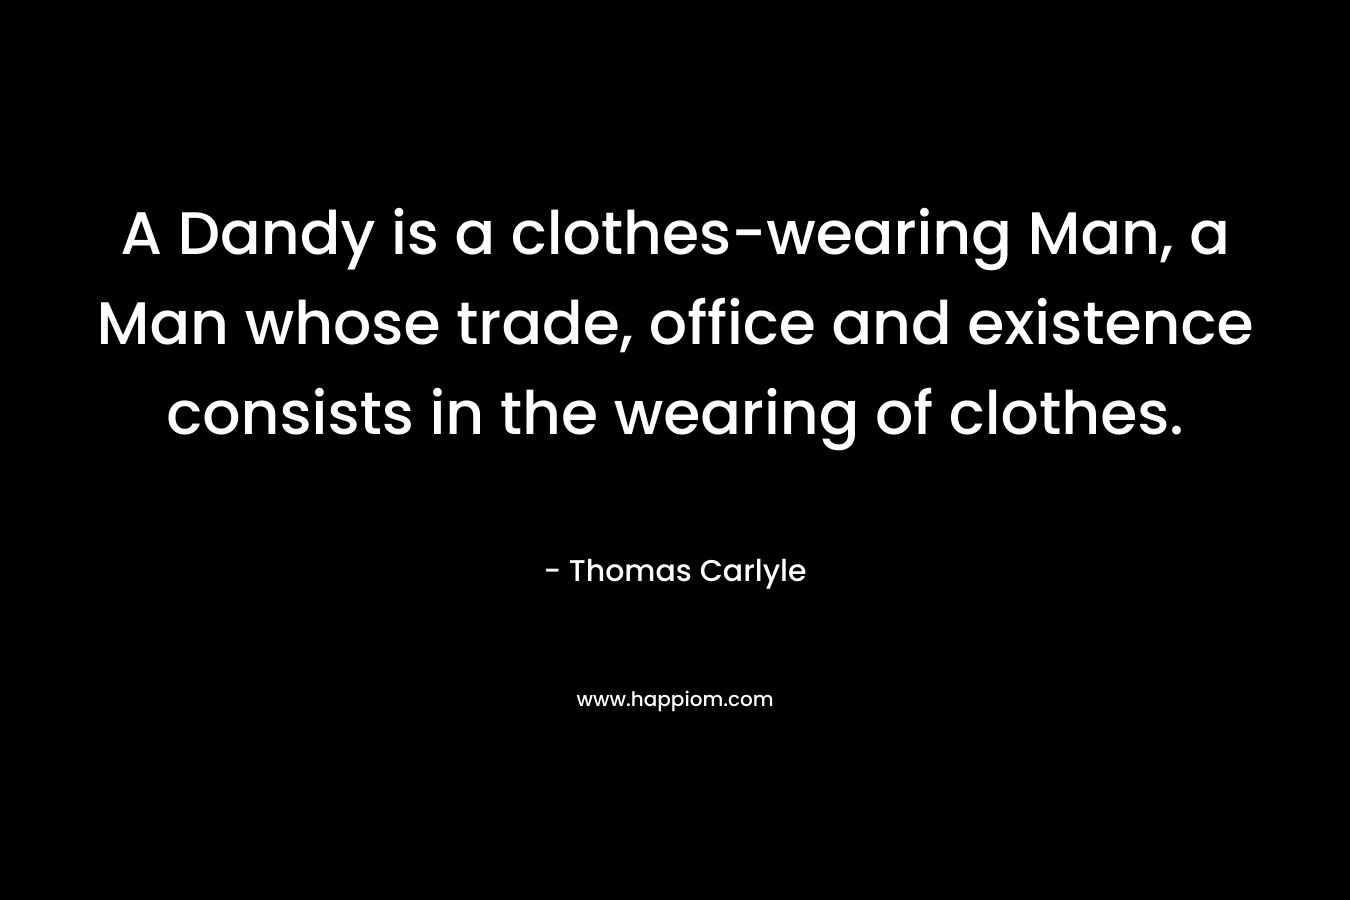 A Dandy is a clothes-wearing Man, a Man whose trade, office and existence consists in the wearing of clothes. – Thomas Carlyle